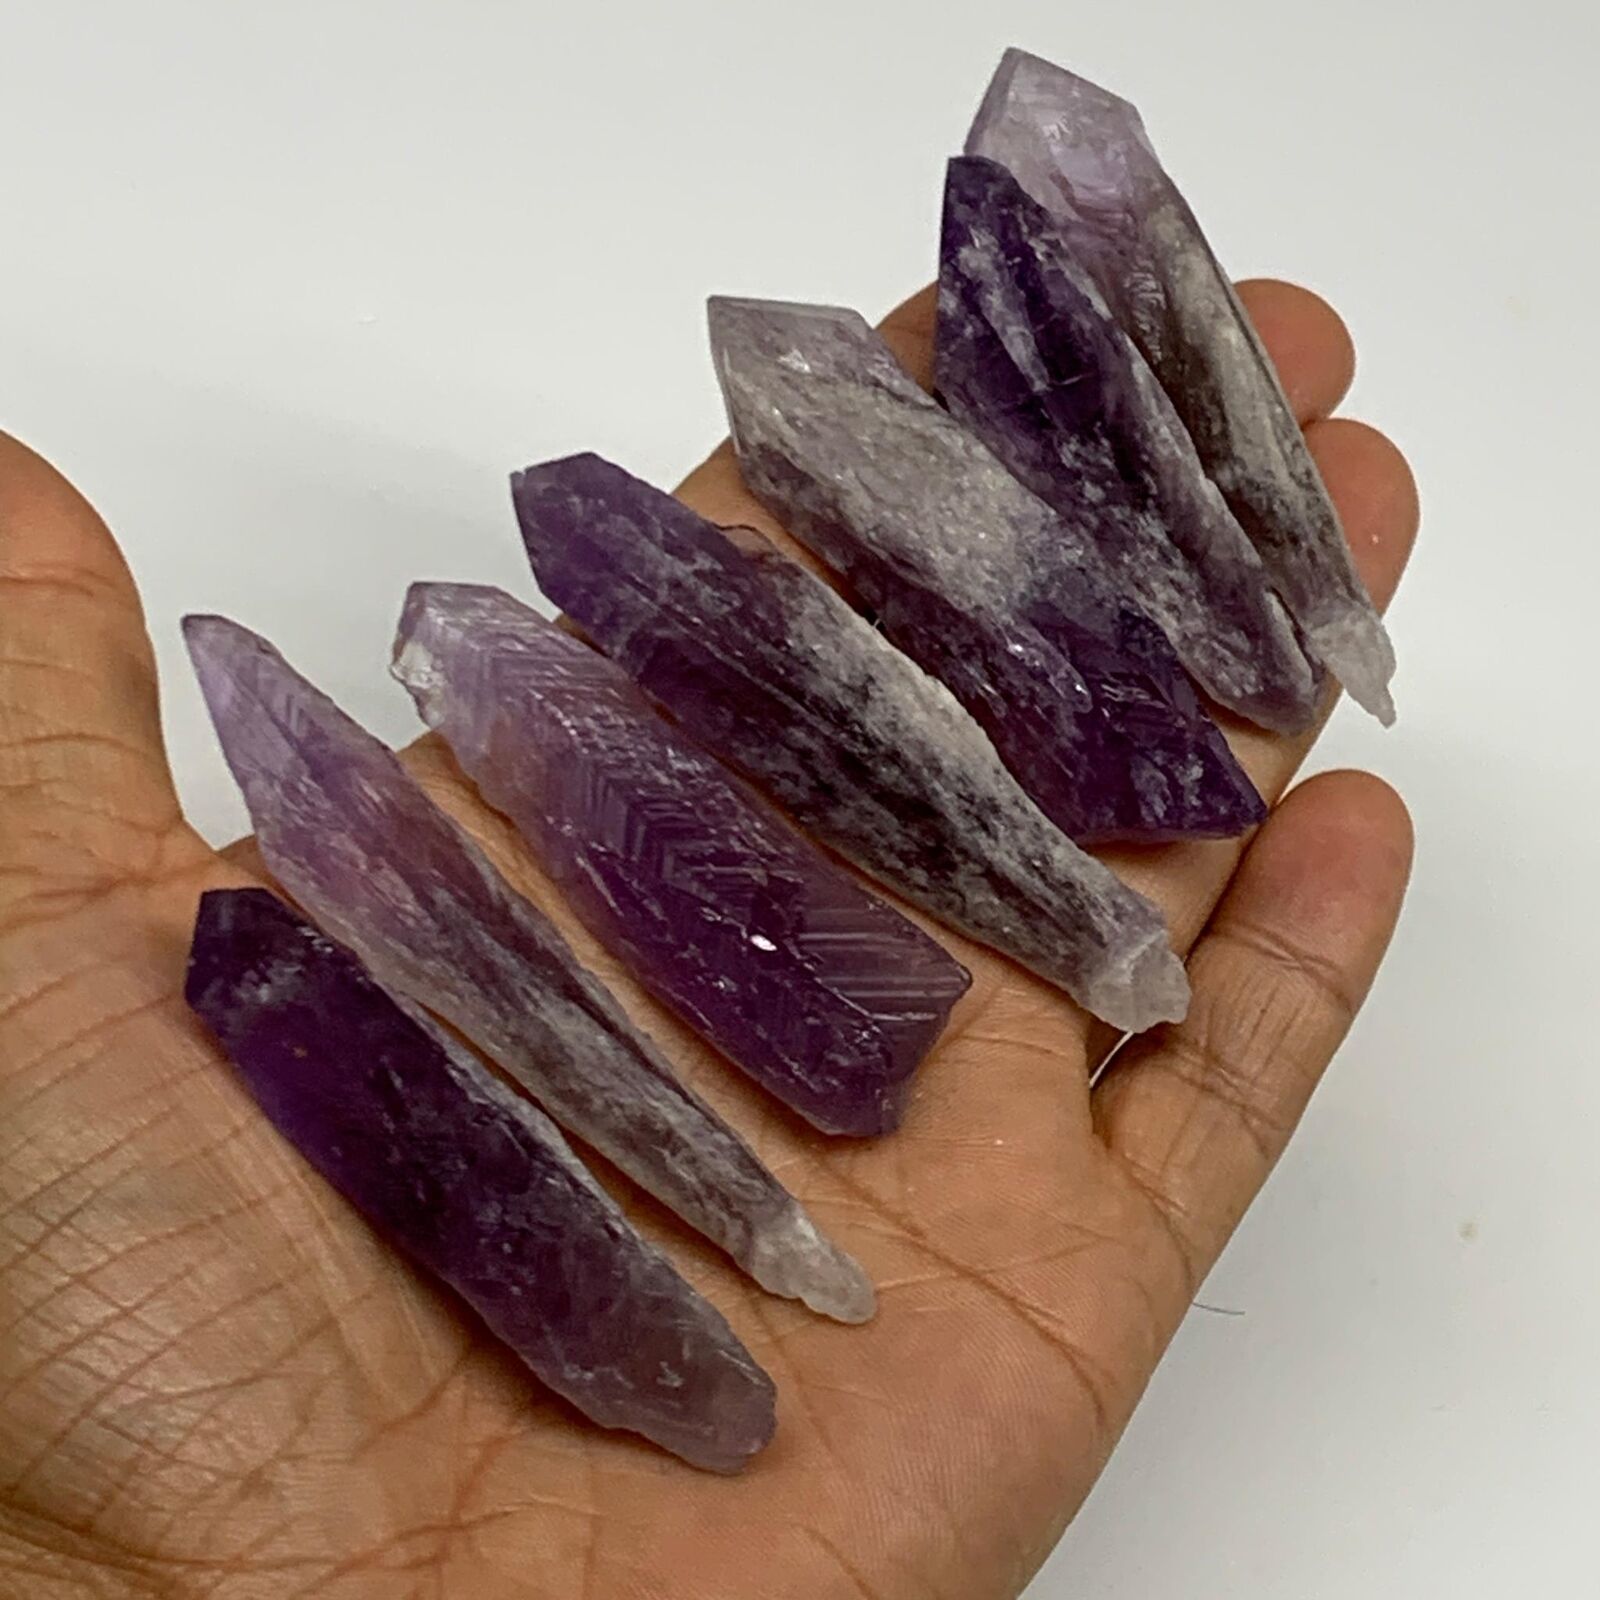 Primary image for 106.1g, 2.3" - 3", 7pcs, Amethyst Point Polished Rough lower part @Brazil, B2885